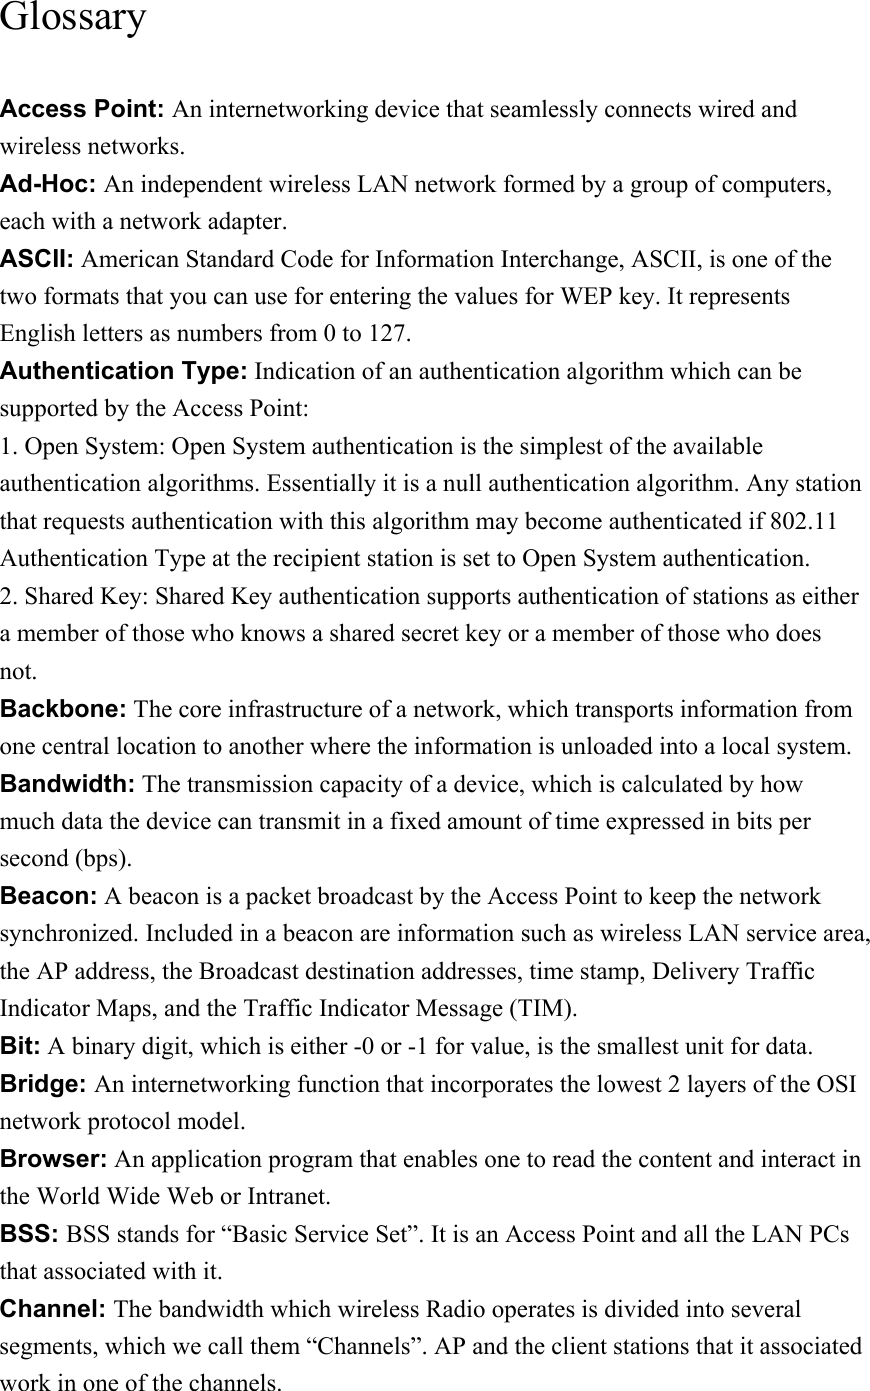 Glossary Access Point: An internetworking device that seamlessly connects wired and wireless networks. Ad-Hoc: An independent wireless LAN network formed by a group of computers, each with a network adapter. ASCII: American Standard Code for Information Interchange, ASCII, is one of the two formats that you can use for entering the values for WEP key. It represents English letters as numbers from 0 to 127. Authentication Type: Indication of an authentication algorithm which can be supported by the Access Point: 1. Open System: Open System authentication is the simplest of the available authentication algorithms. Essentially it is a null authentication algorithm. Any station that requests authentication with this algorithm may become authenticated if 802.11 Authentication Type at the recipient station is set to Open System authentication. 2. Shared Key: Shared Key authentication supports authentication of stations as either a member of those who knows a shared secret key or a member of those who does not. Backbone: The core infrastructure of a network, which transports information from one central location to another where the information is unloaded into a local system. Bandwidth: The transmission capacity of a device, which is calculated by how much data the device can transmit in a fixed amount of time expressed in bits per second (bps). Beacon: A beacon is a packet broadcast by the Access Point to keep the network synchronized. Included in a beacon are information such as wireless LAN service area, the AP address, the Broadcast destination addresses, time stamp, Delivery Traffic Indicator Maps, and the Traffic Indicator Message (TIM). Bit: A binary digit, which is either -0 or -1 for value, is the smallest unit for data. Bridge: An internetworking function that incorporates the lowest 2 layers of the OSI network protocol model. Browser: An application program that enables one to read the content and interact in the World Wide Web or Intranet. BSS: BSS stands for “Basic Service Set”. It is an Access Point and all the LAN PCs that associated with it. Channel: The bandwidth which wireless Radio operates is divided into several segments, which we call them “Channels”. AP and the client stations that it associated work in one of the channels. 